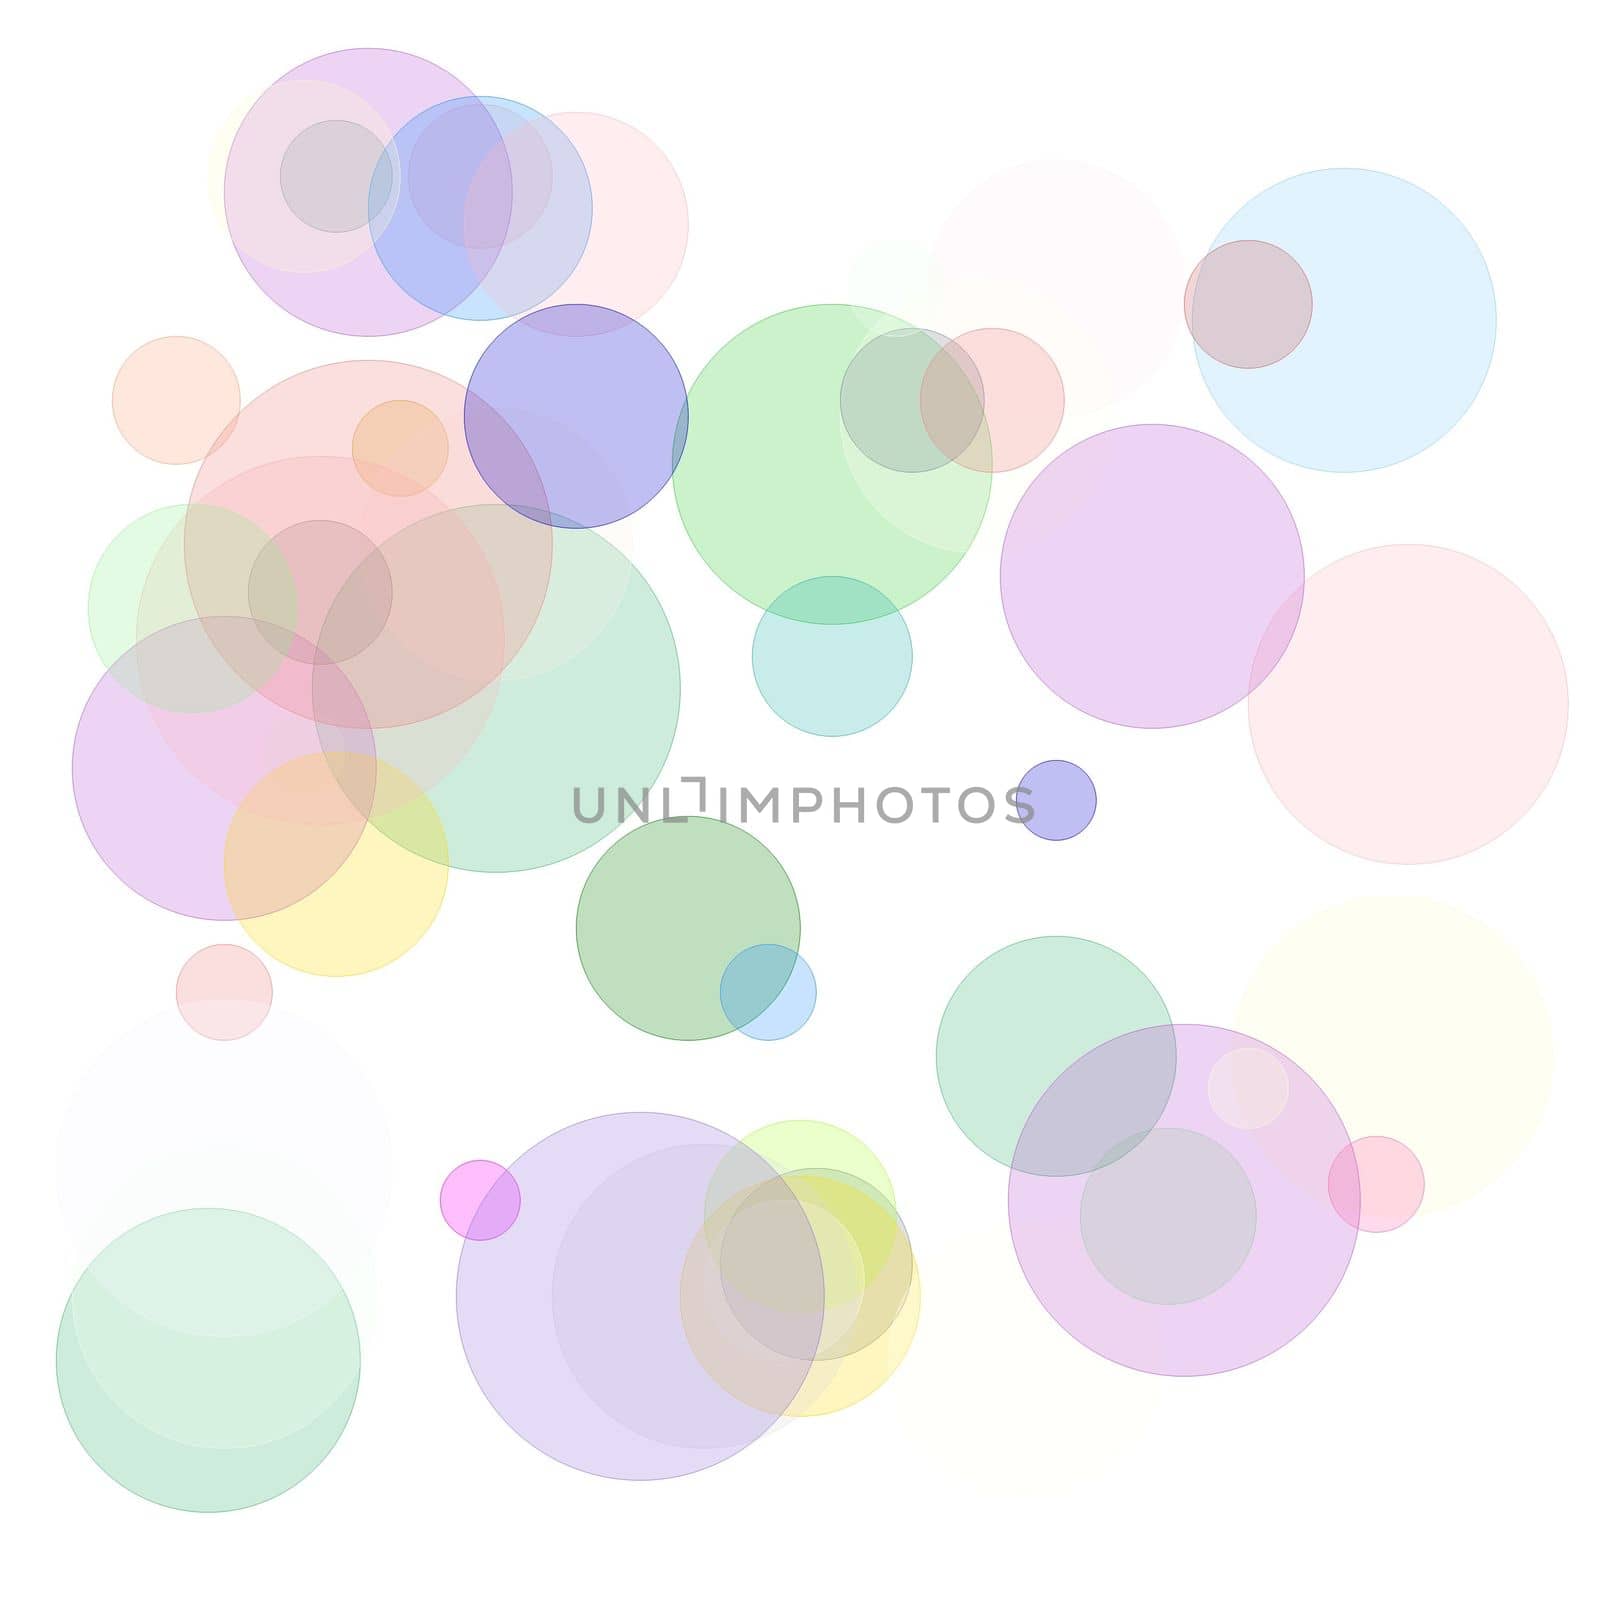 Abstract blue pink grey white yellow green red violet brown circ by claudiodivizia